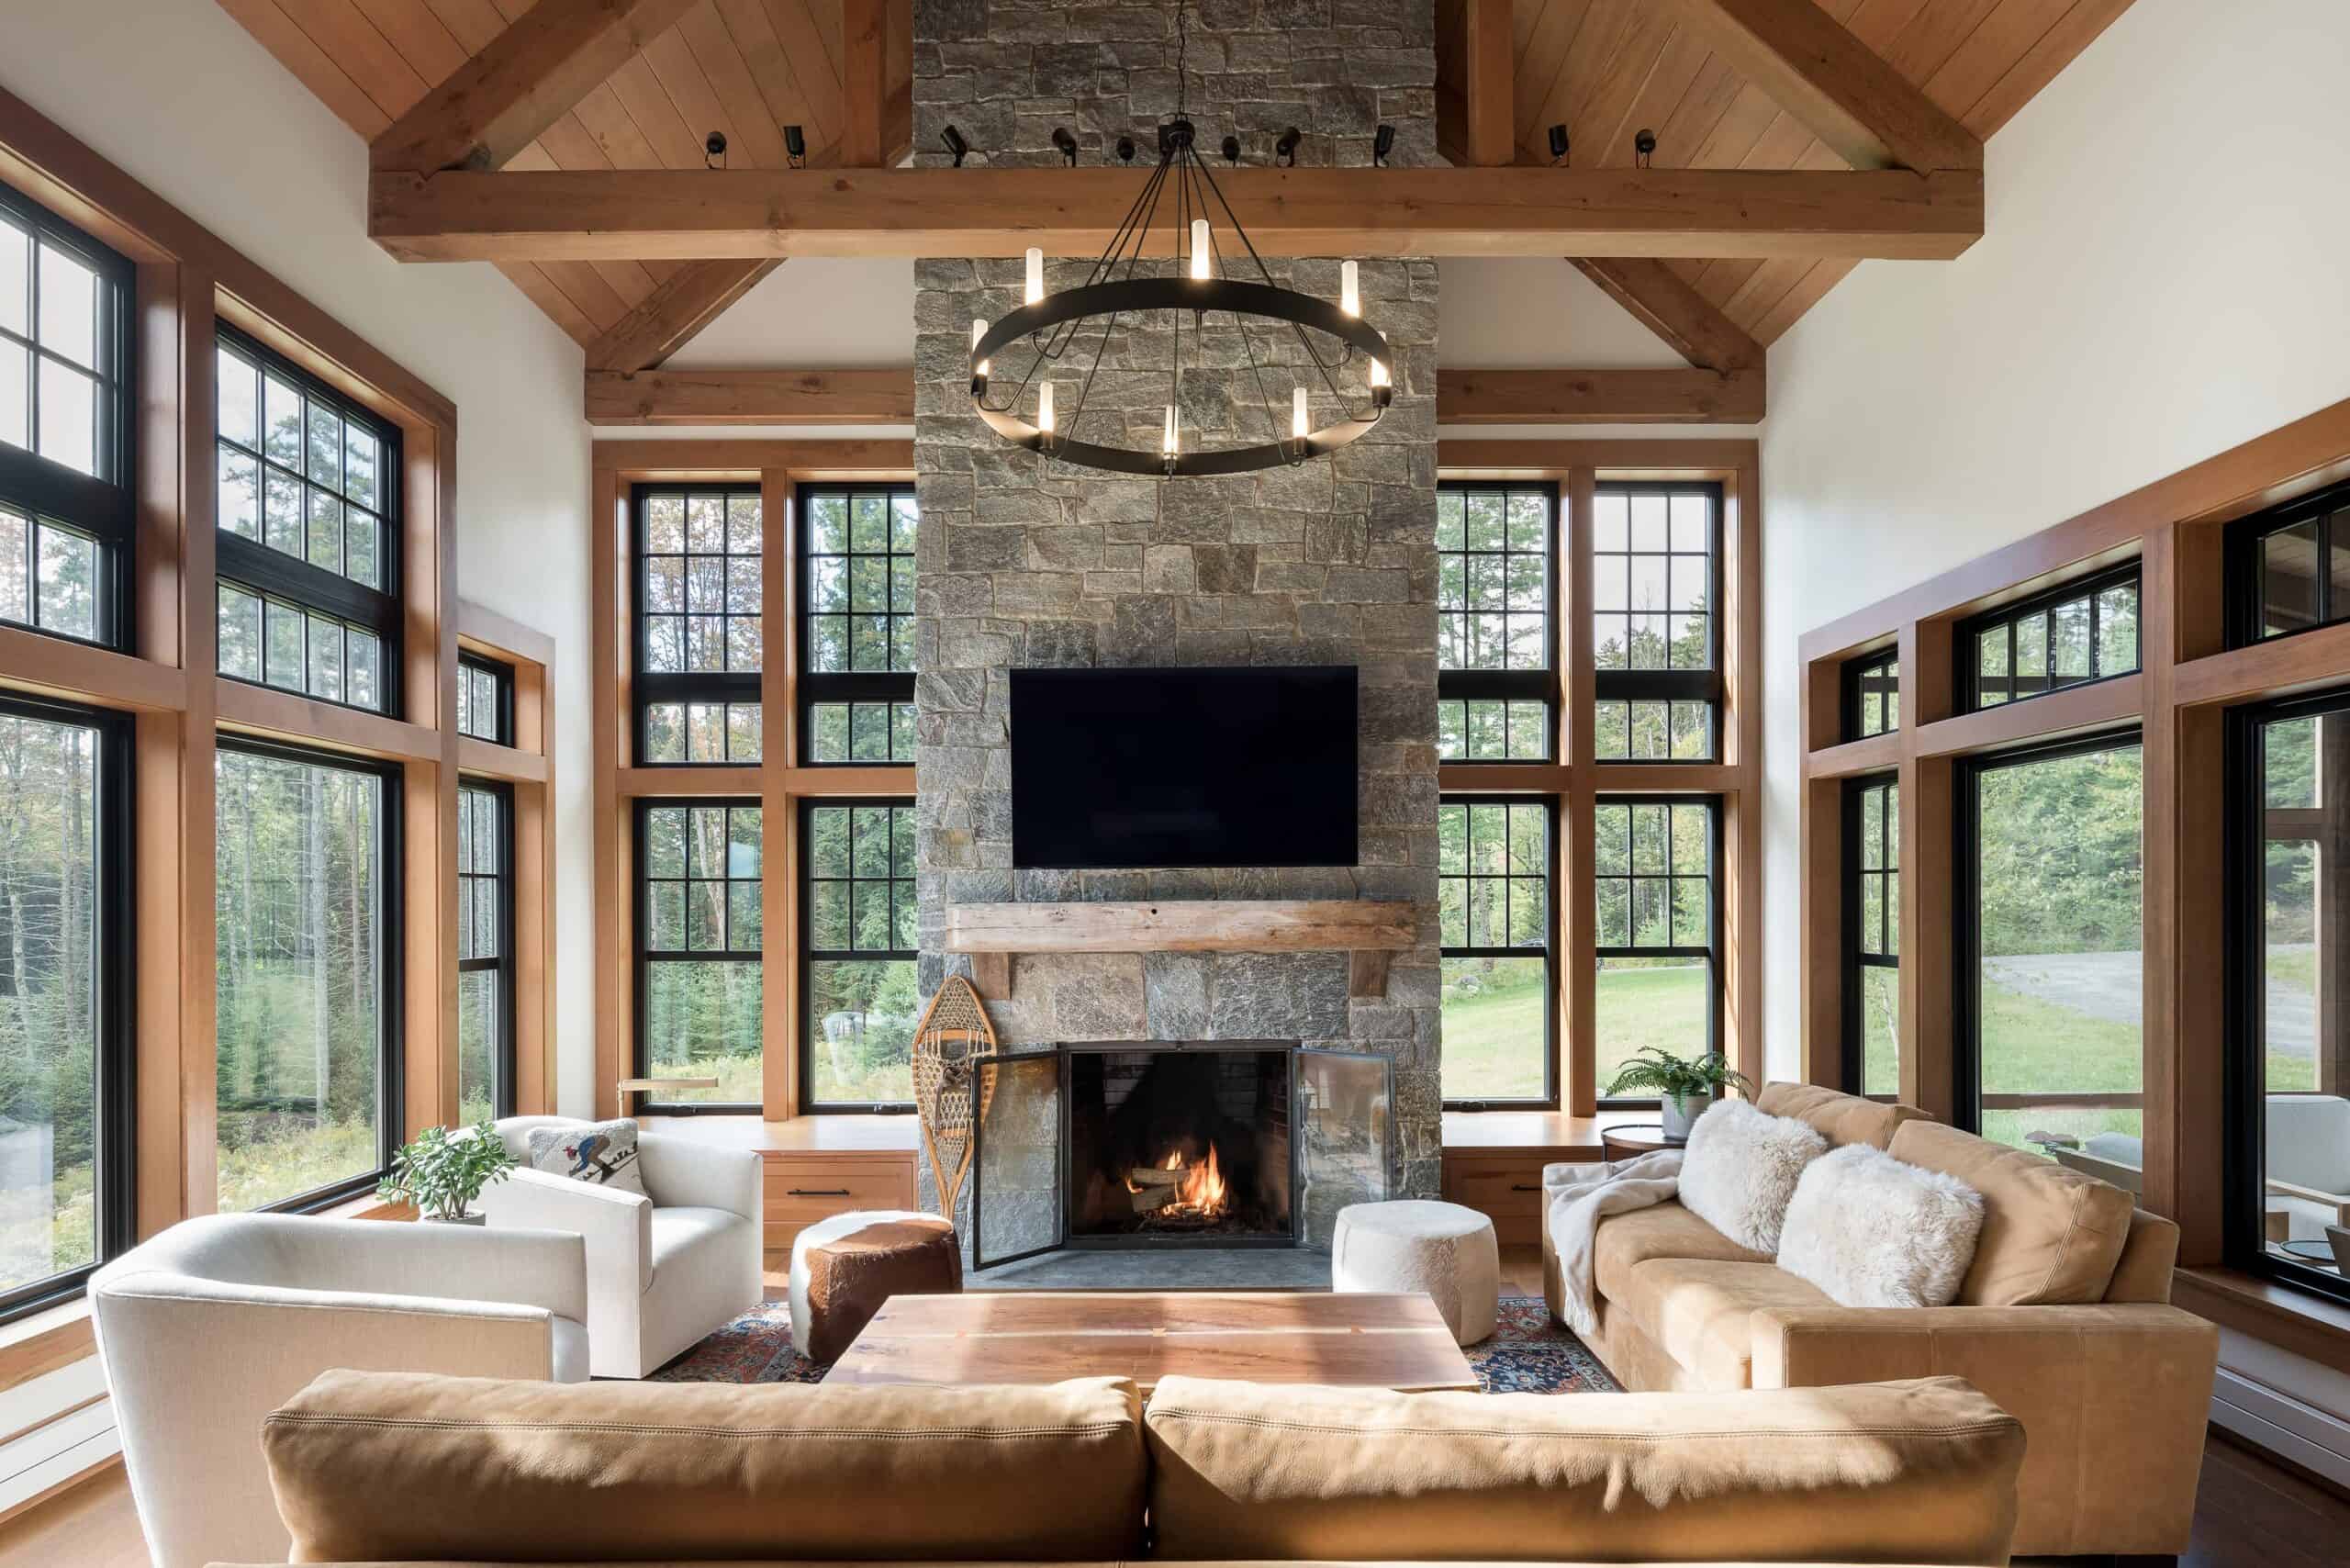 Residential Construction - Beautiful Custom Homes | Stowe Builder Vermont